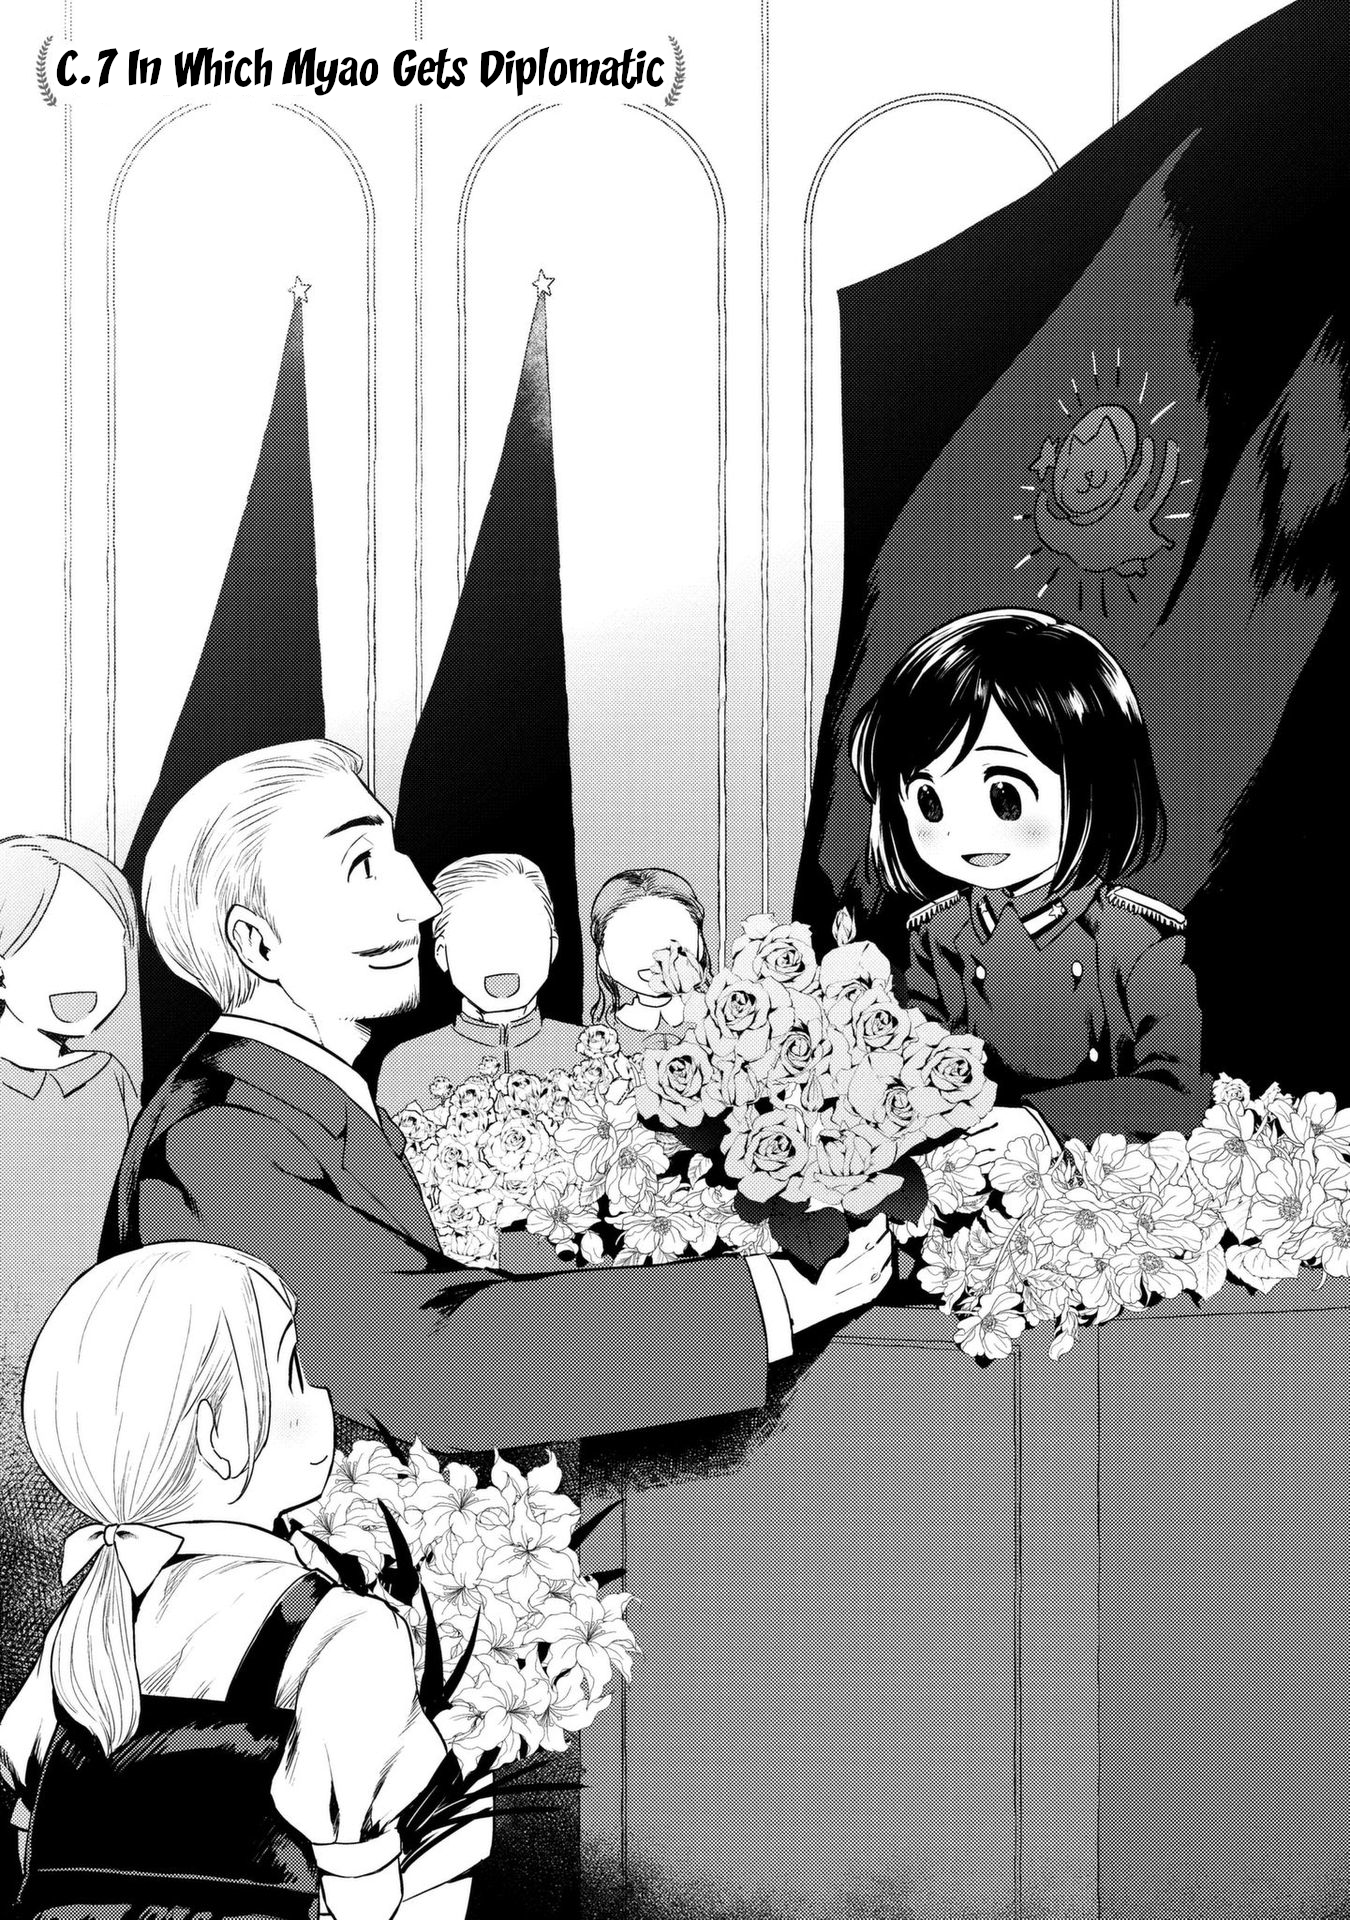 Oh, Our General Myao Vol.1 Chapter 7: In Which Myao Gets Diplomatic - Picture 1